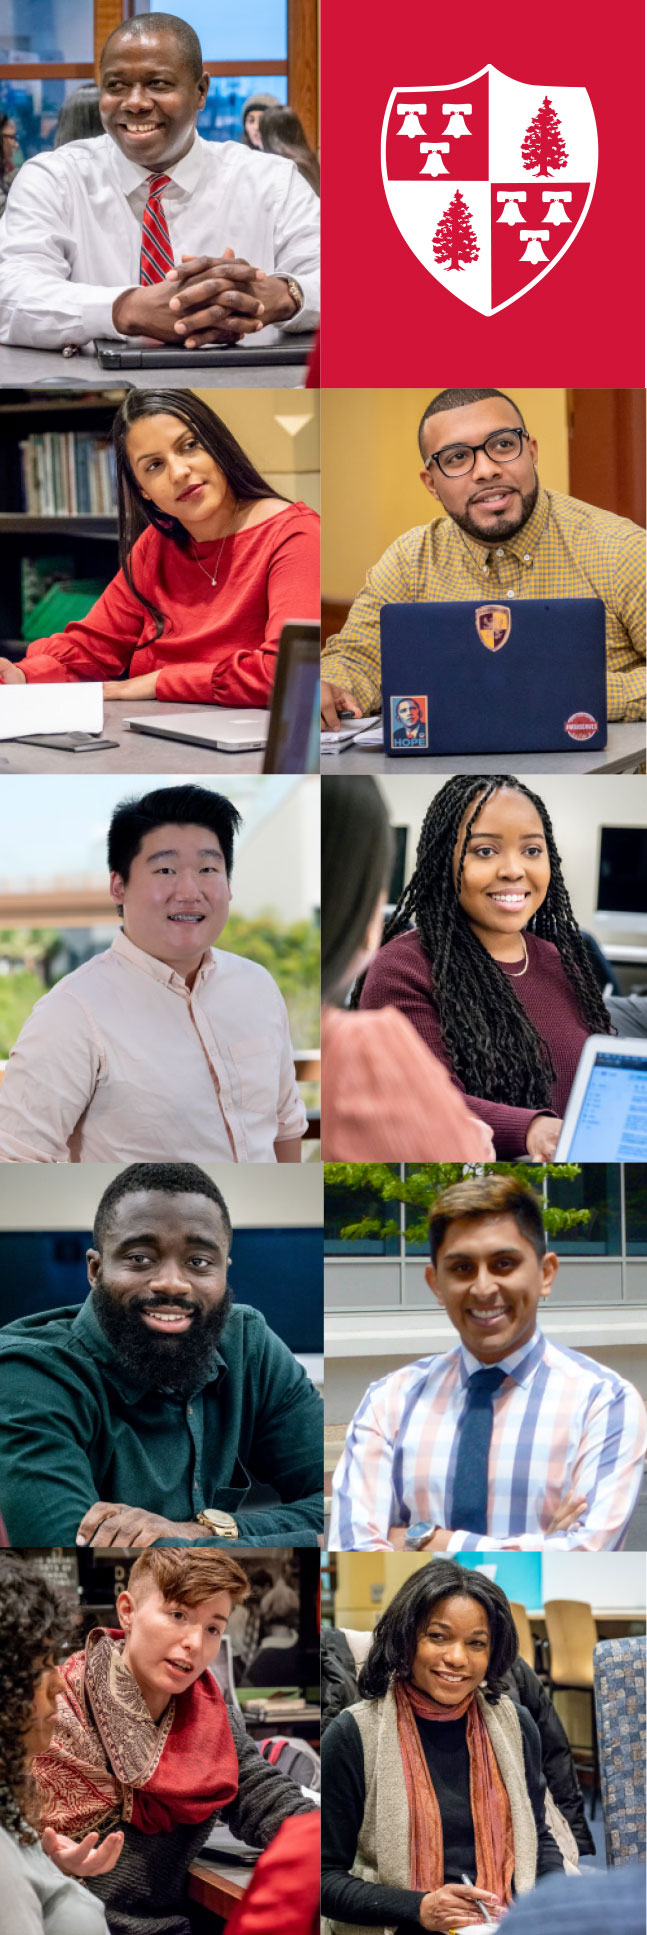 Graduates of the Educational Leadership master’s program include (top to bottom, left) Peter Osebre ’19, Natalie Lopez ’19, Lucas Min ’18, Kevin Brenfo-Agyeman ’19, Jessy Cocciolone ’19, (top to bottom, right) Claudio Alejo ’19, Chelsea Rushing ’19, Dann Truitt ’14, ’19 MA and Lynda Gary-Davidson ’20.